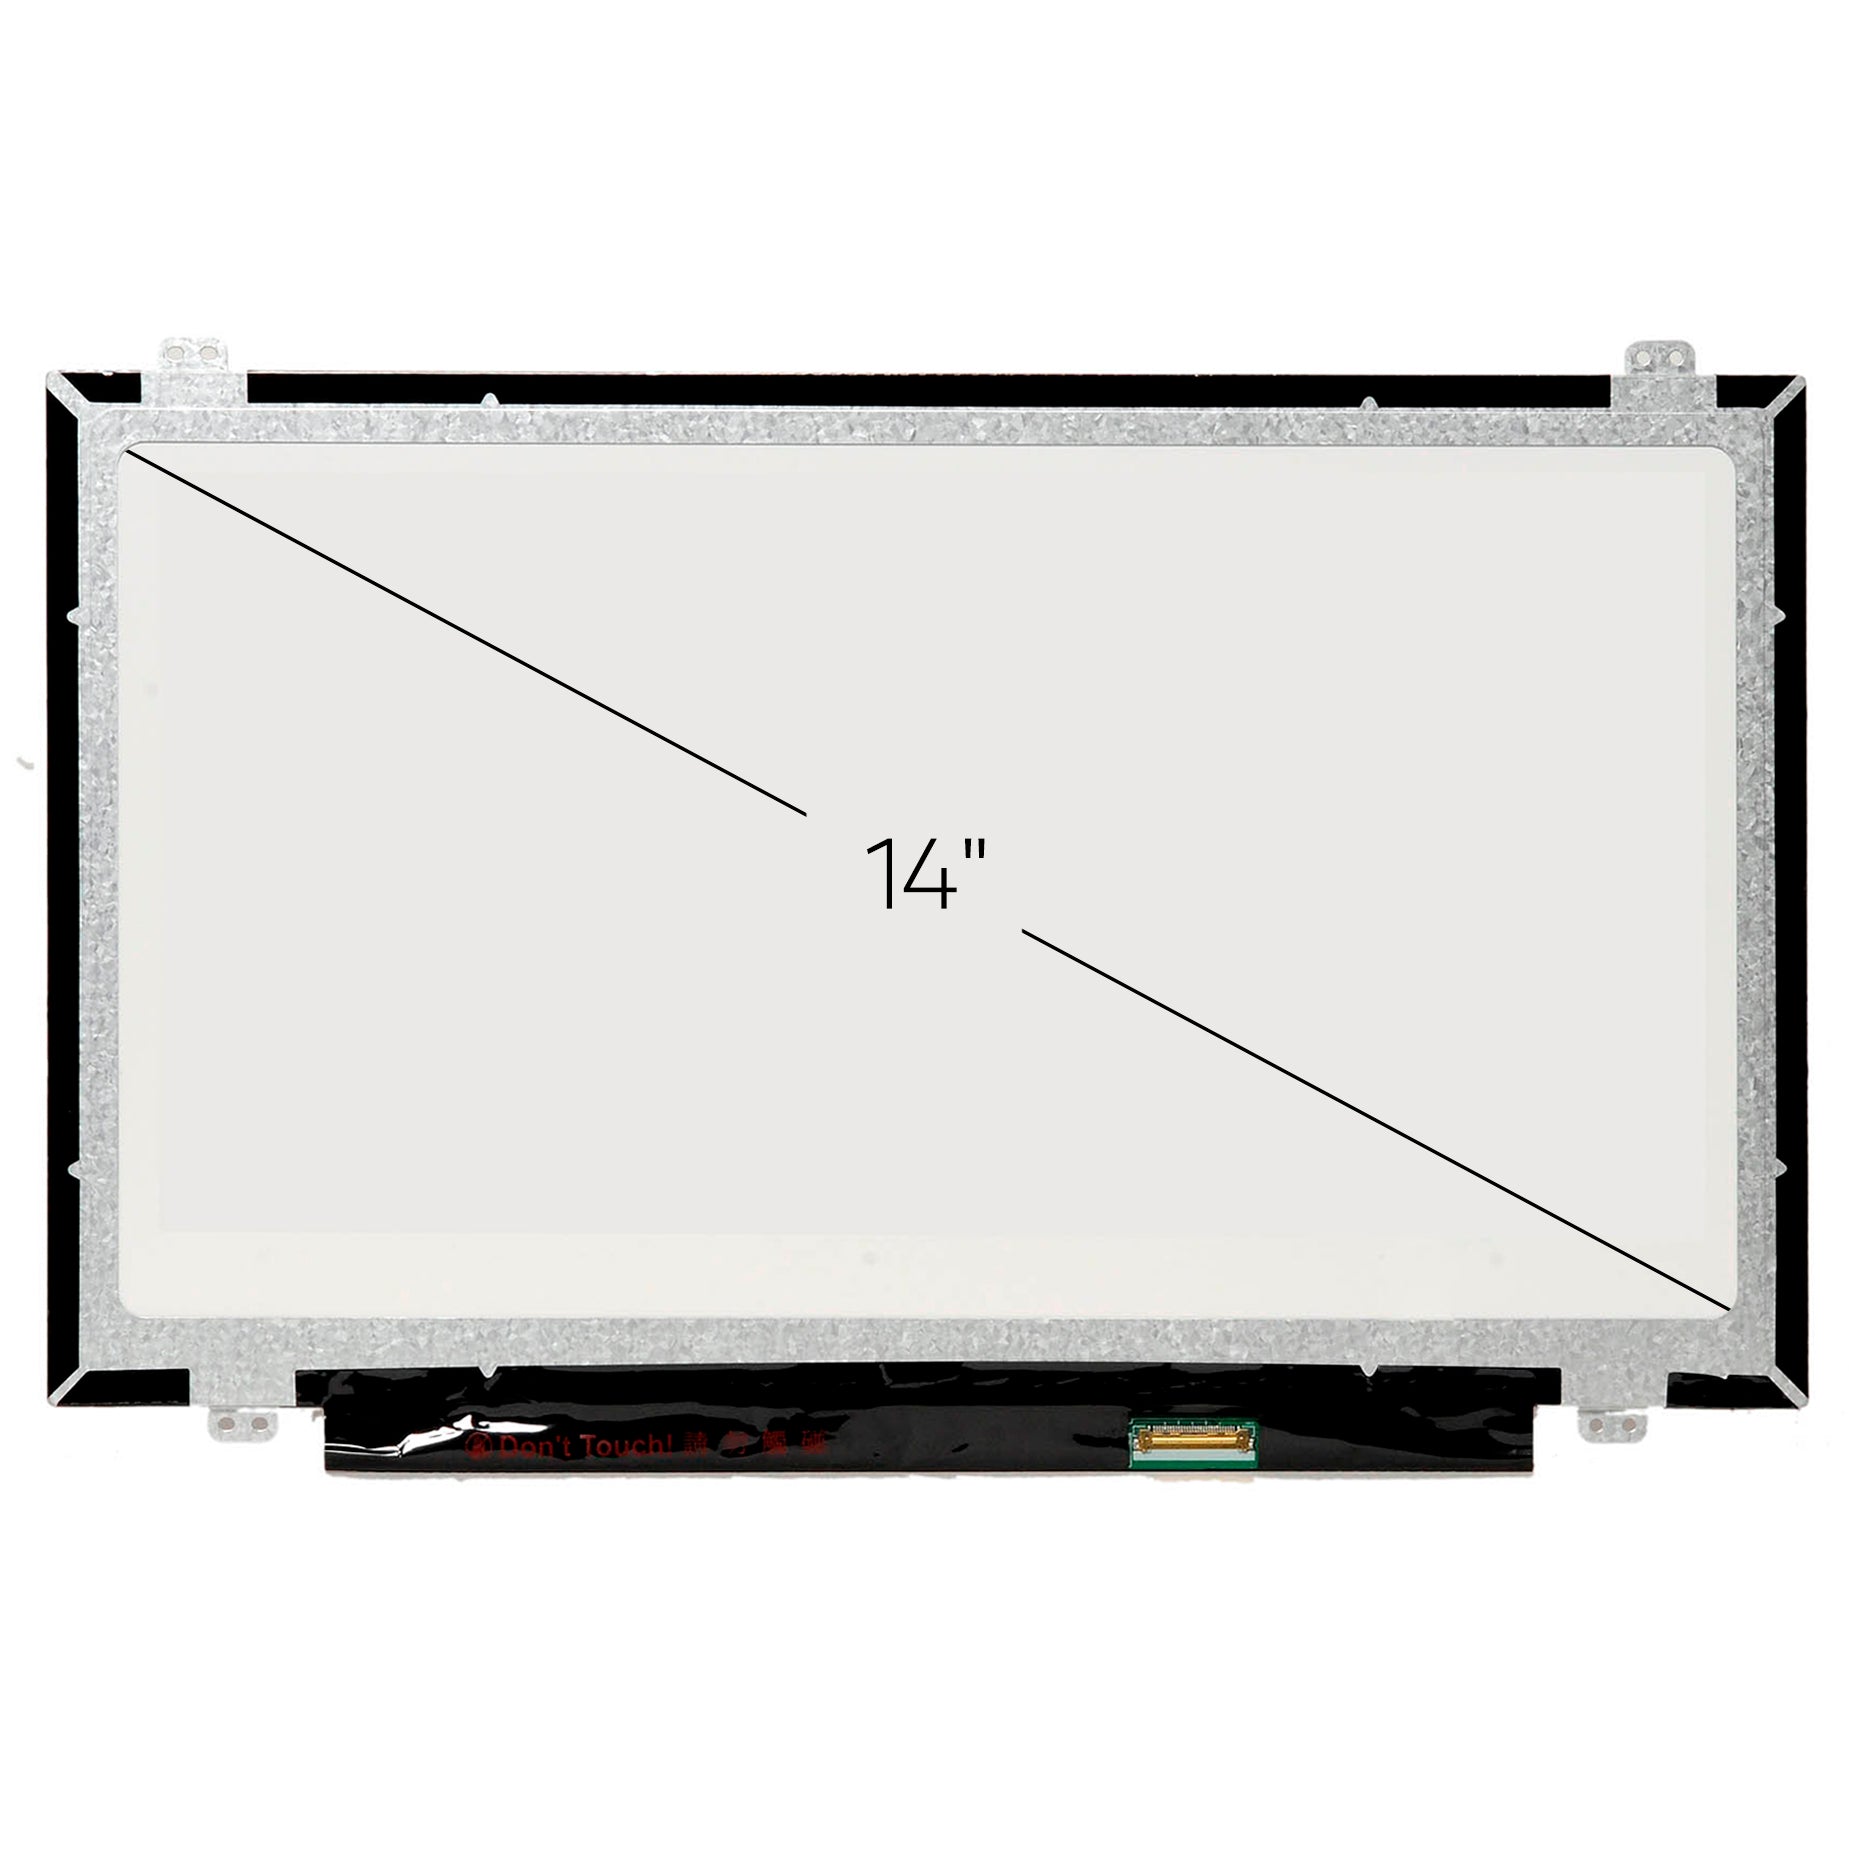 Screen Replacement for Dell Latitude 3450 HD 1366x768 Glossy LCD LED Display